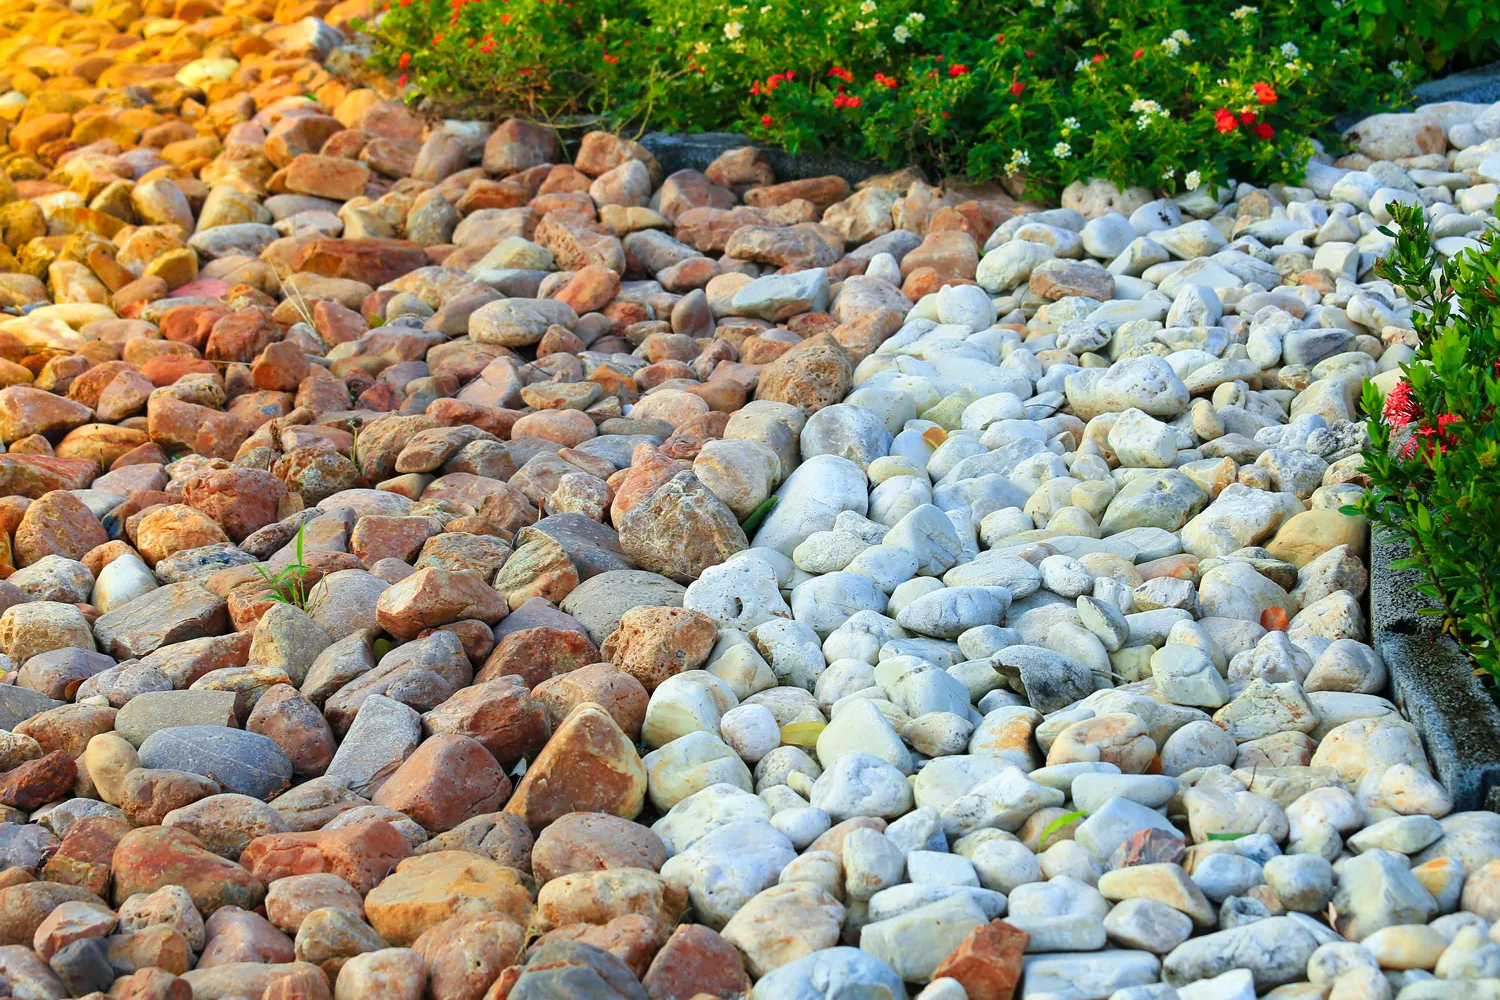 Landscaping Tips – How To Use River Rocks In Your Landscape Design…